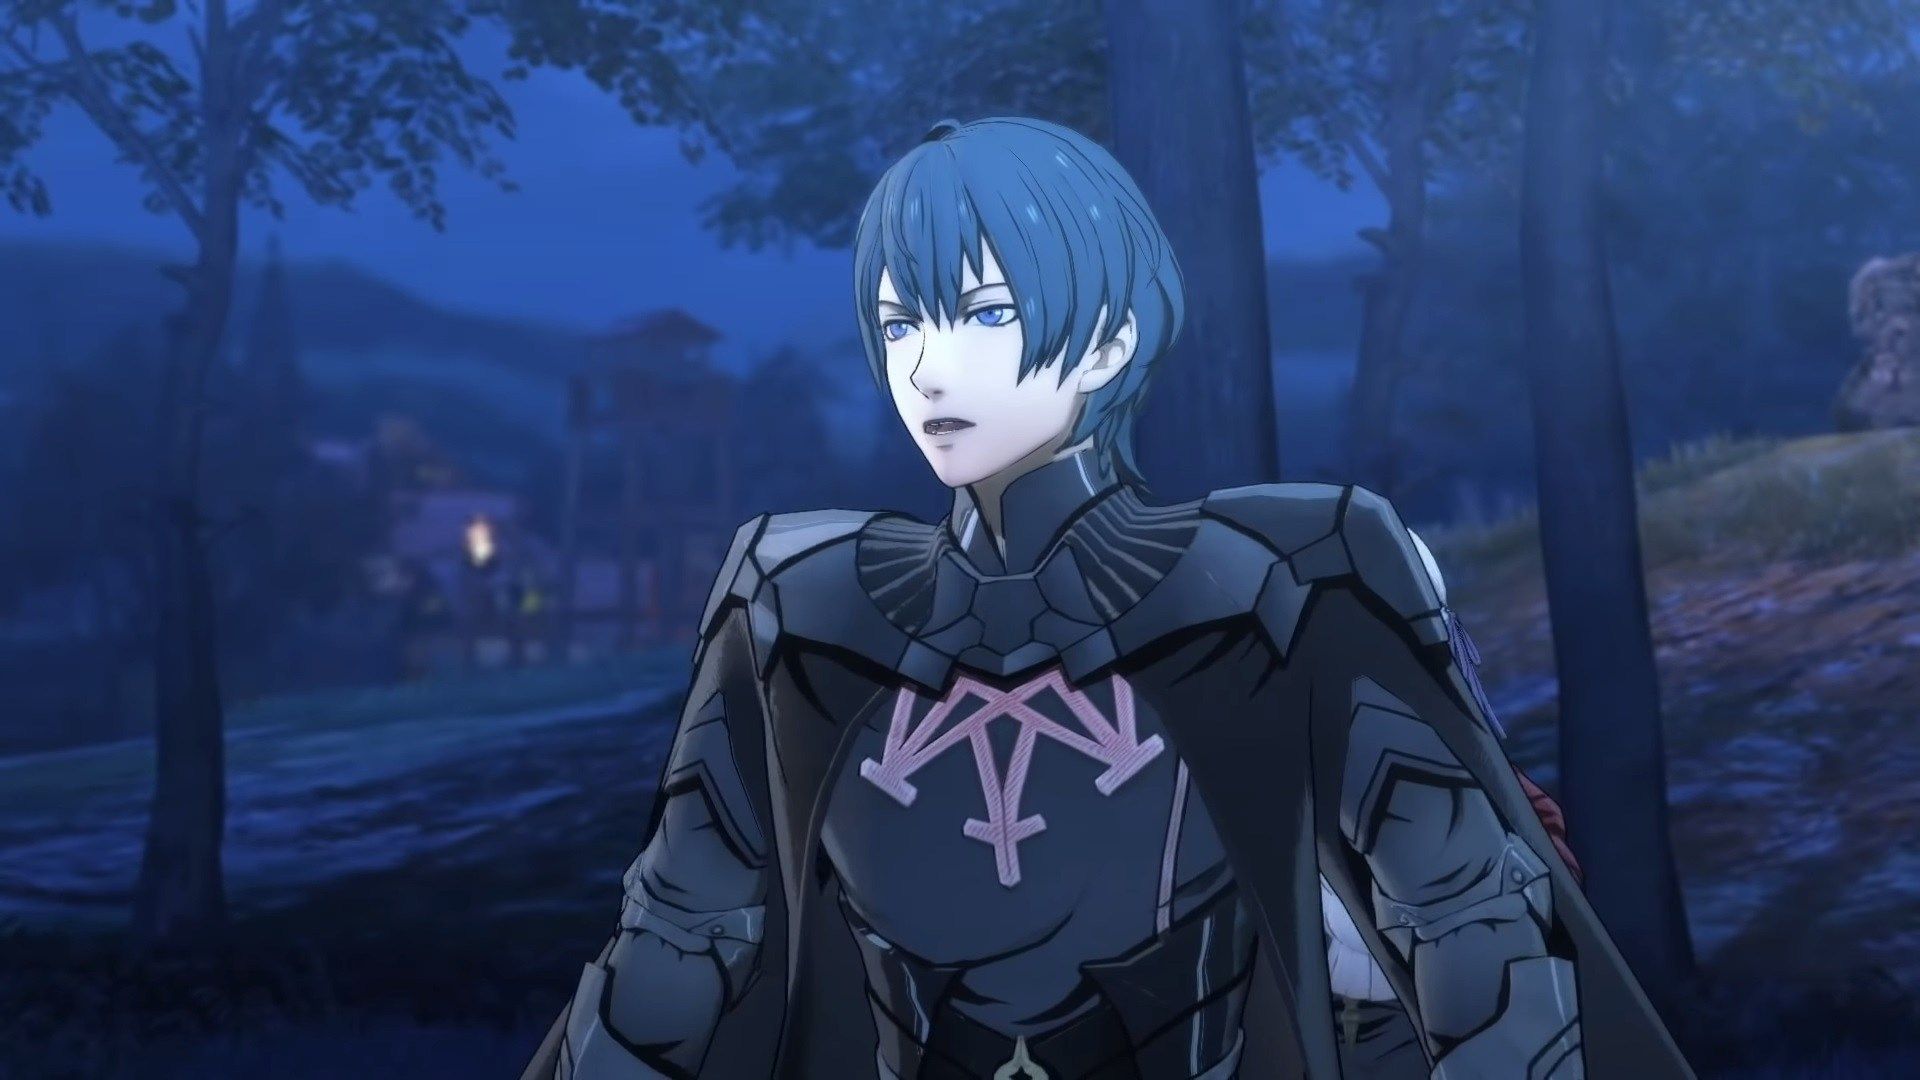 Fire Emblem: Three Houses now has another gay romance option